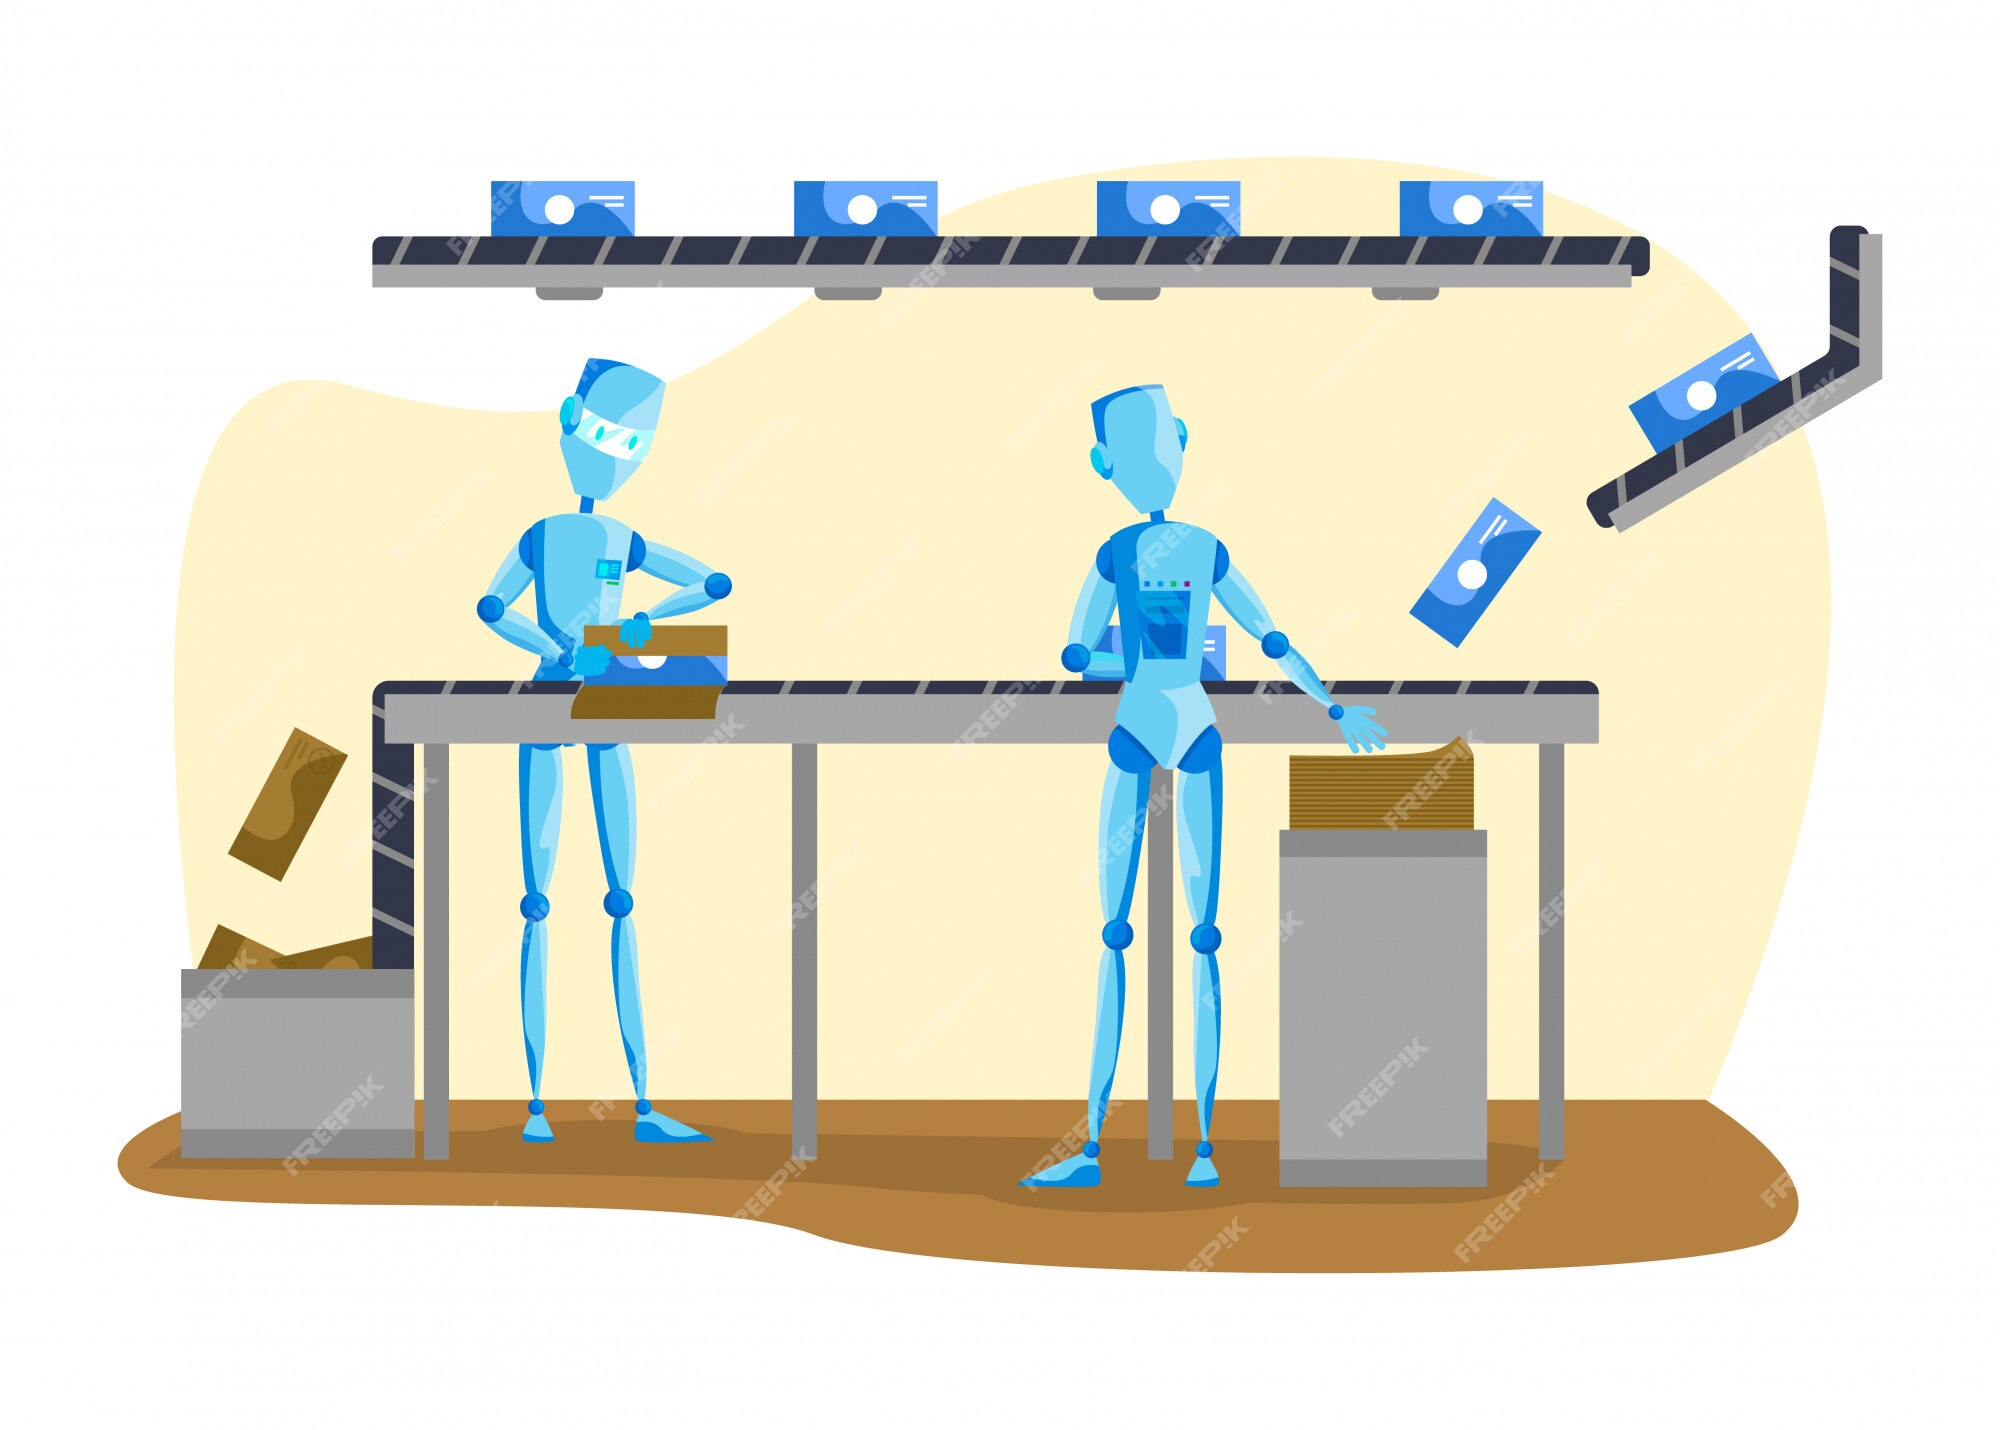 Premium Vector | Robot and people illustration, cartoon machine working on  conveyor belt, packing products from transporter on white